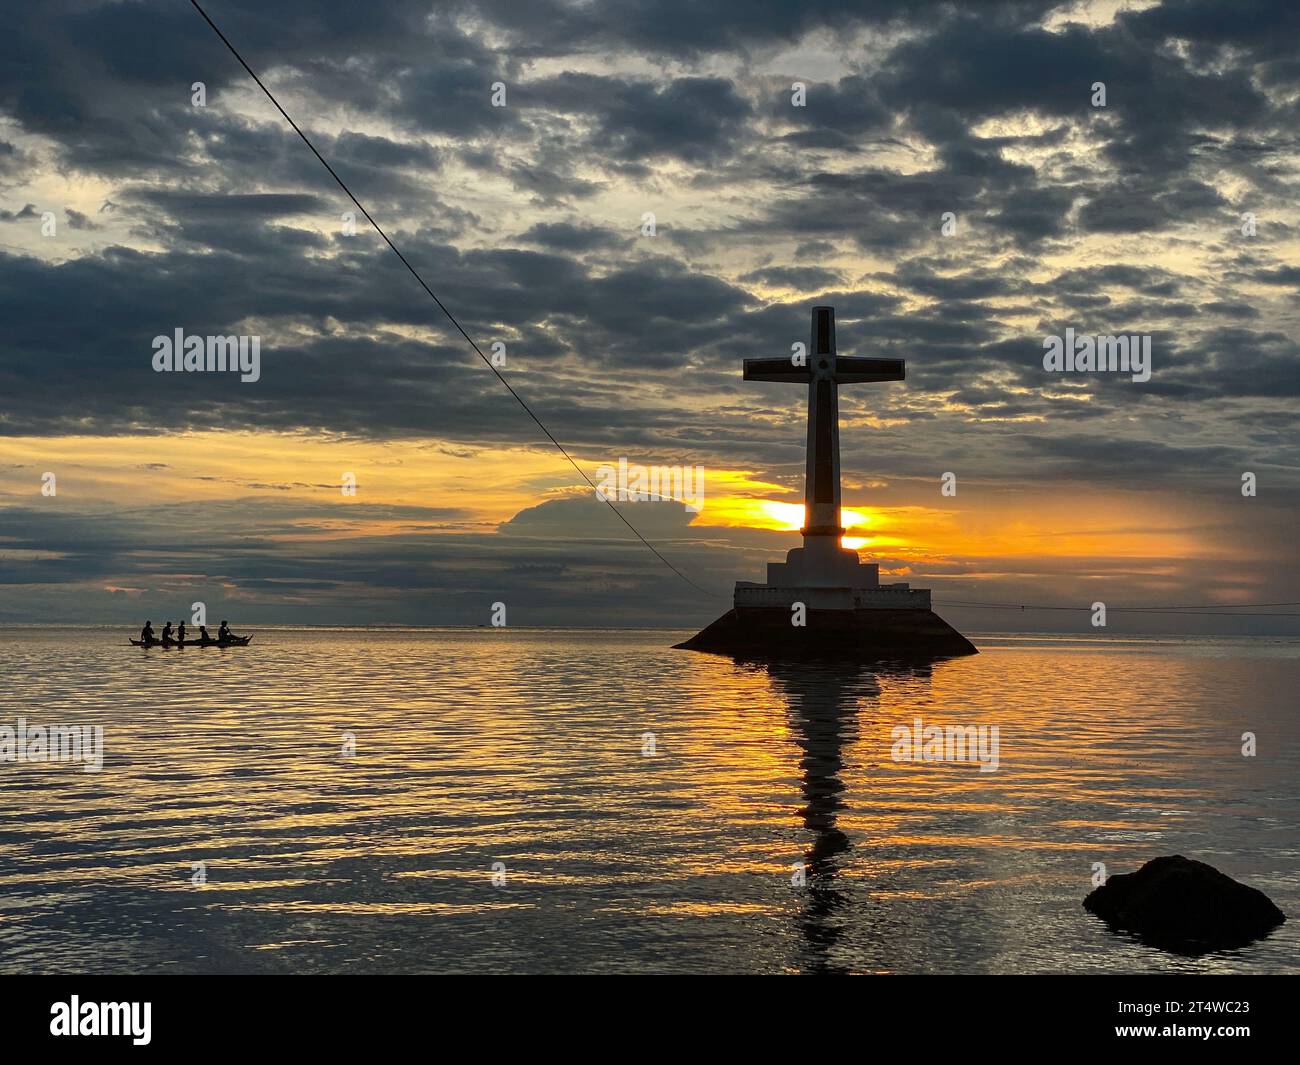 Boat going to Sunken Cemetery in Camiguin Island. Philippines. Twilight over the sea. Stock Photo